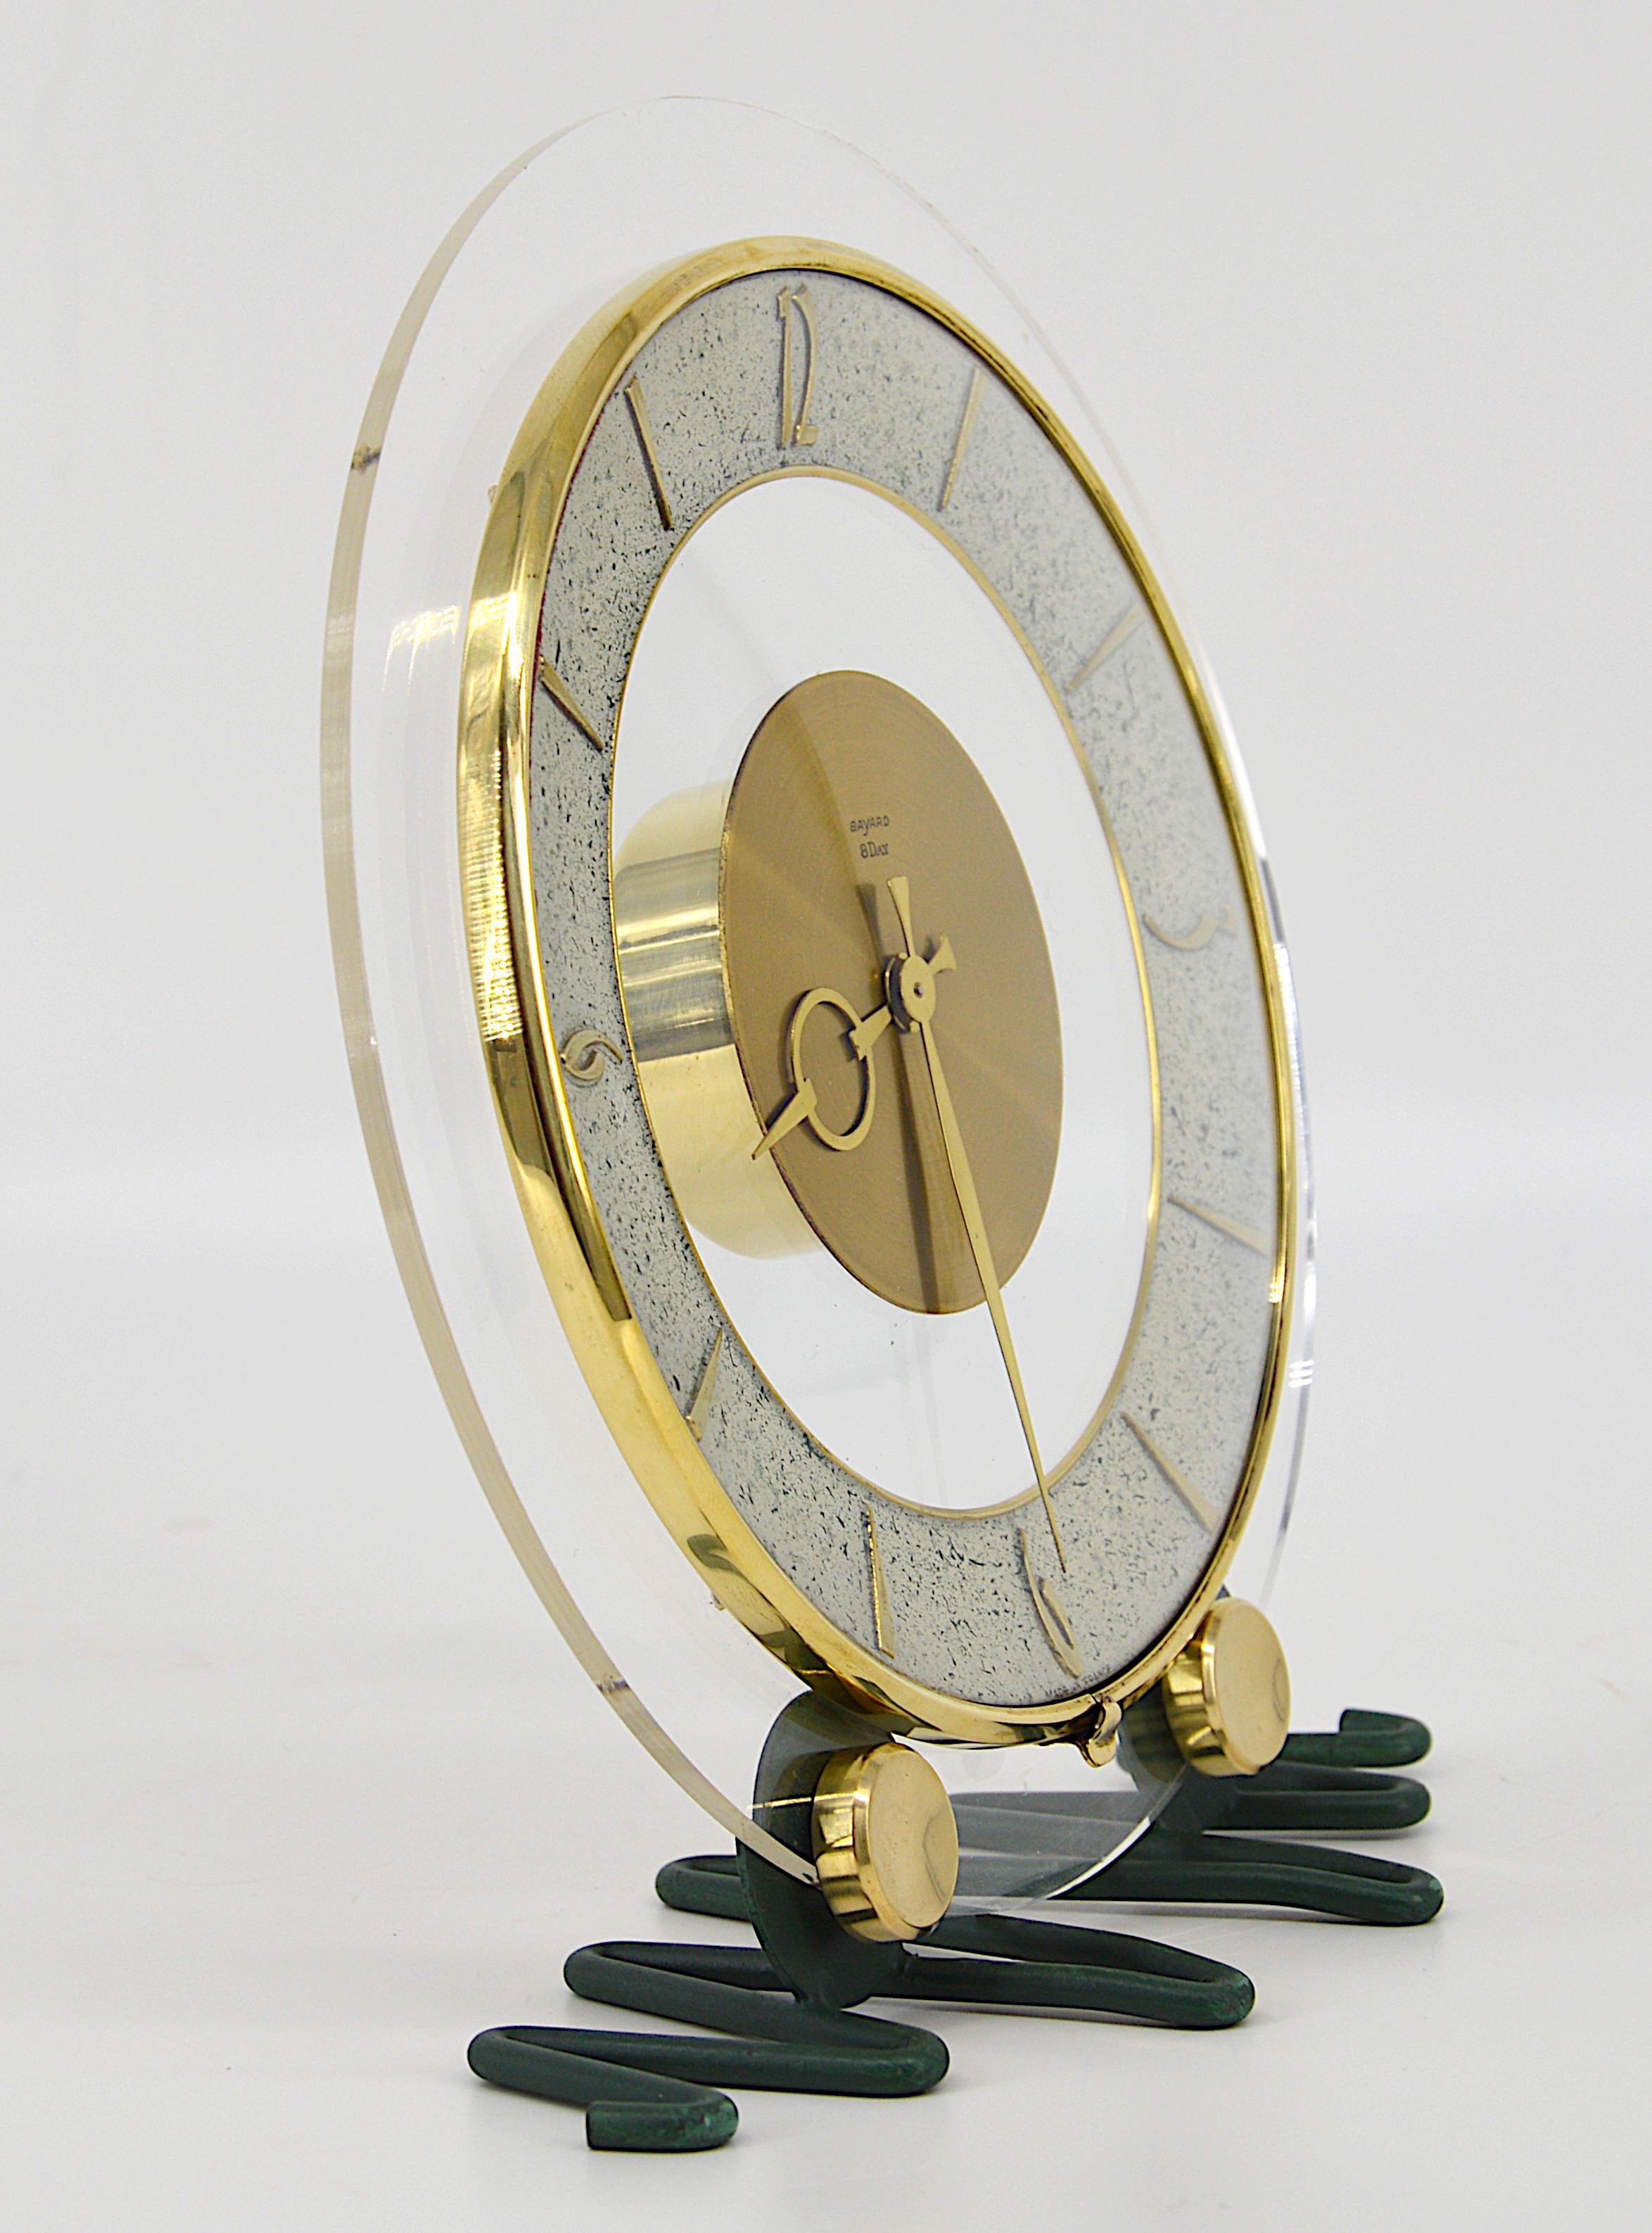 French Art Deco clock by Bayard, France, 1930s. Brass and metal frame. Plastic back and rounded glass. 8 days movement. Measures: Height 8.6